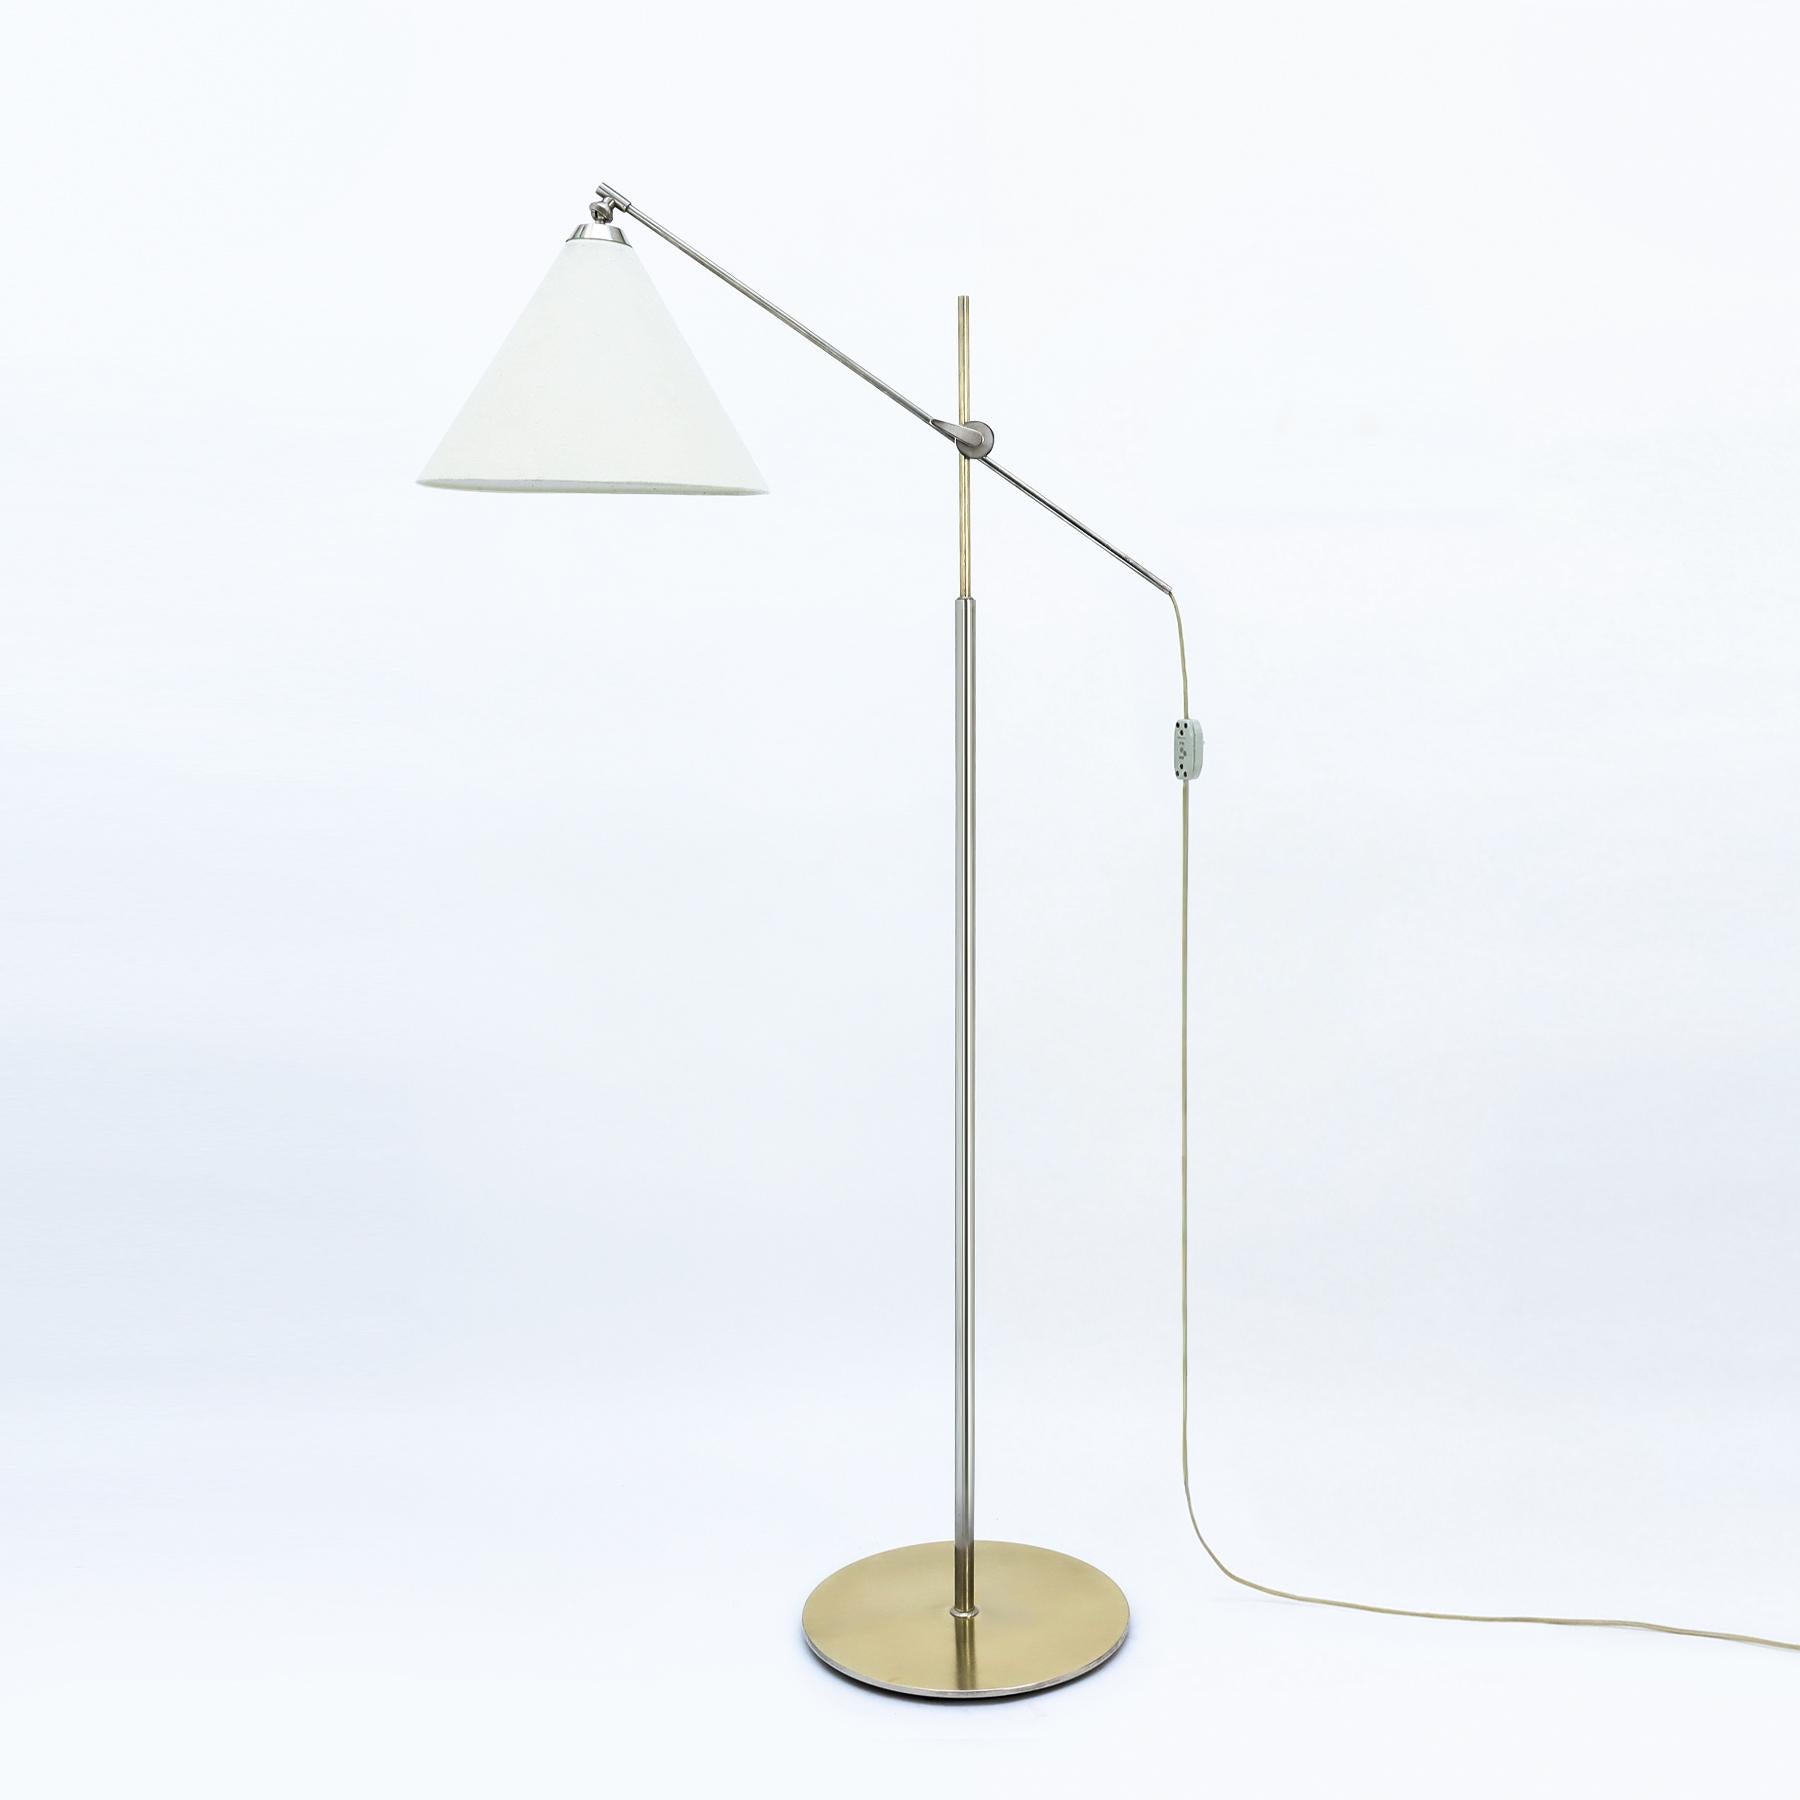 Vintage 1950s brushed brass and nickel plated fully adjustable Danish floor lamp, model THV 376 designed by TH. Valentiner for Povl Dinesen

This is a rare and elusive floor lamp designed, and produced, by two rare and elusive people